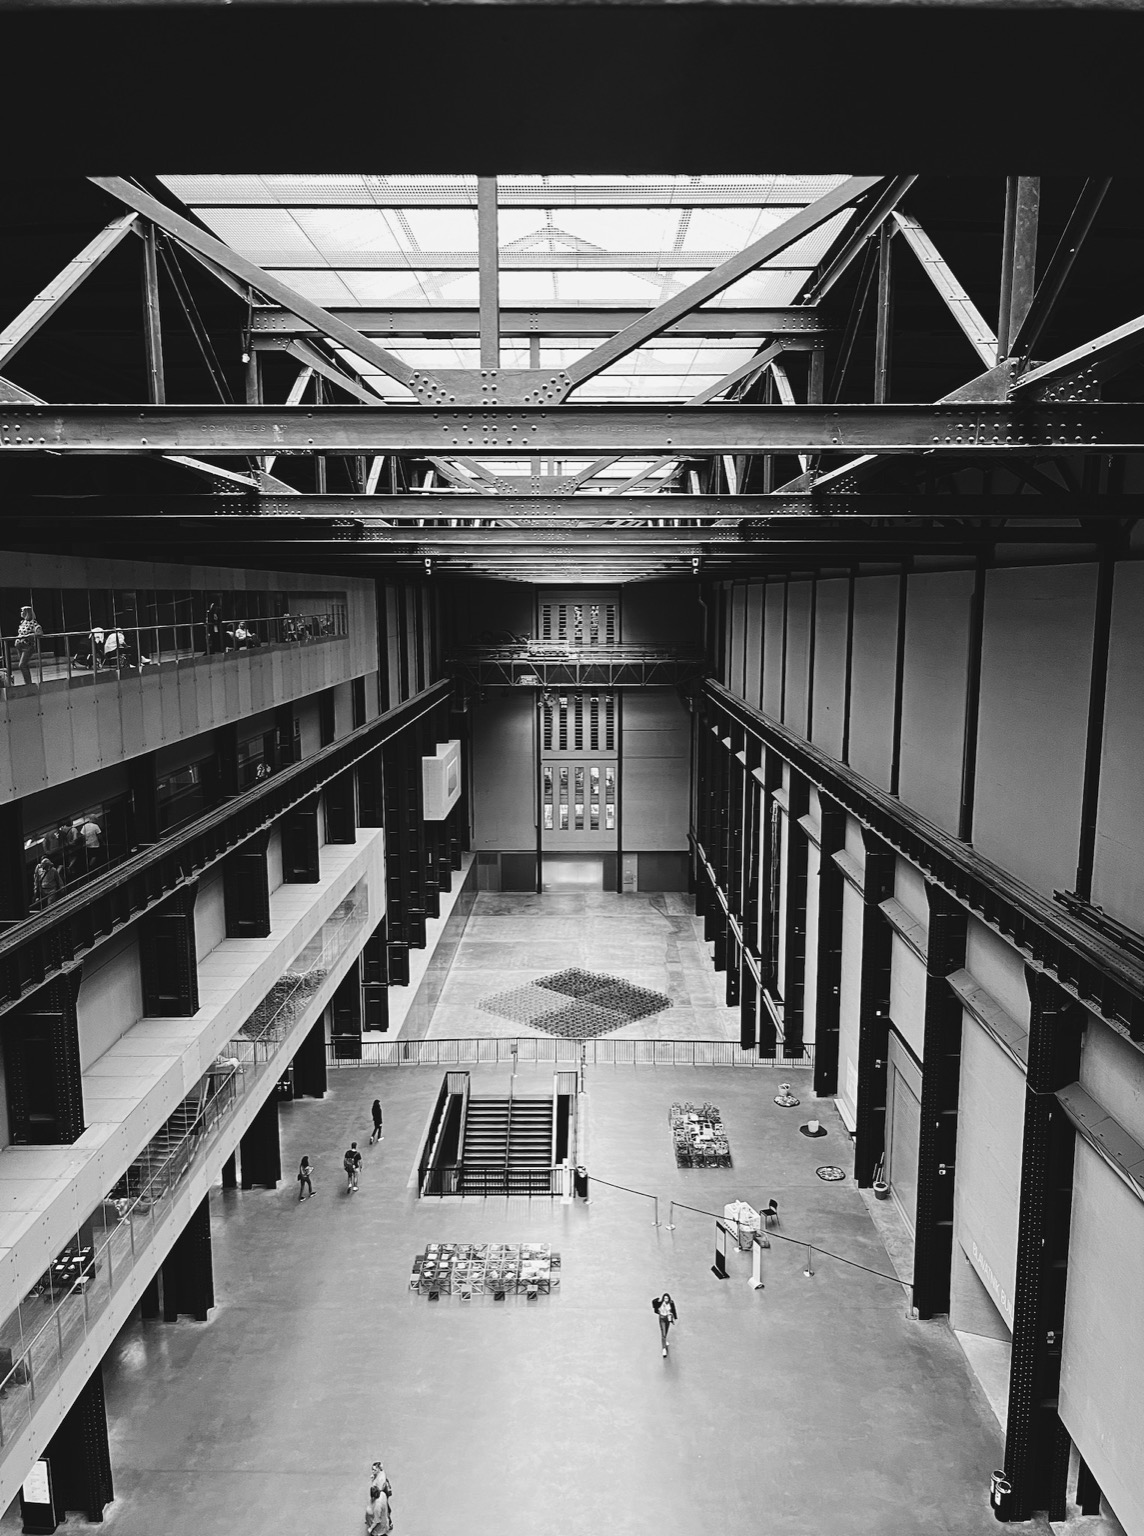 Black and white photography of the hall of the Tate Modern museum in London